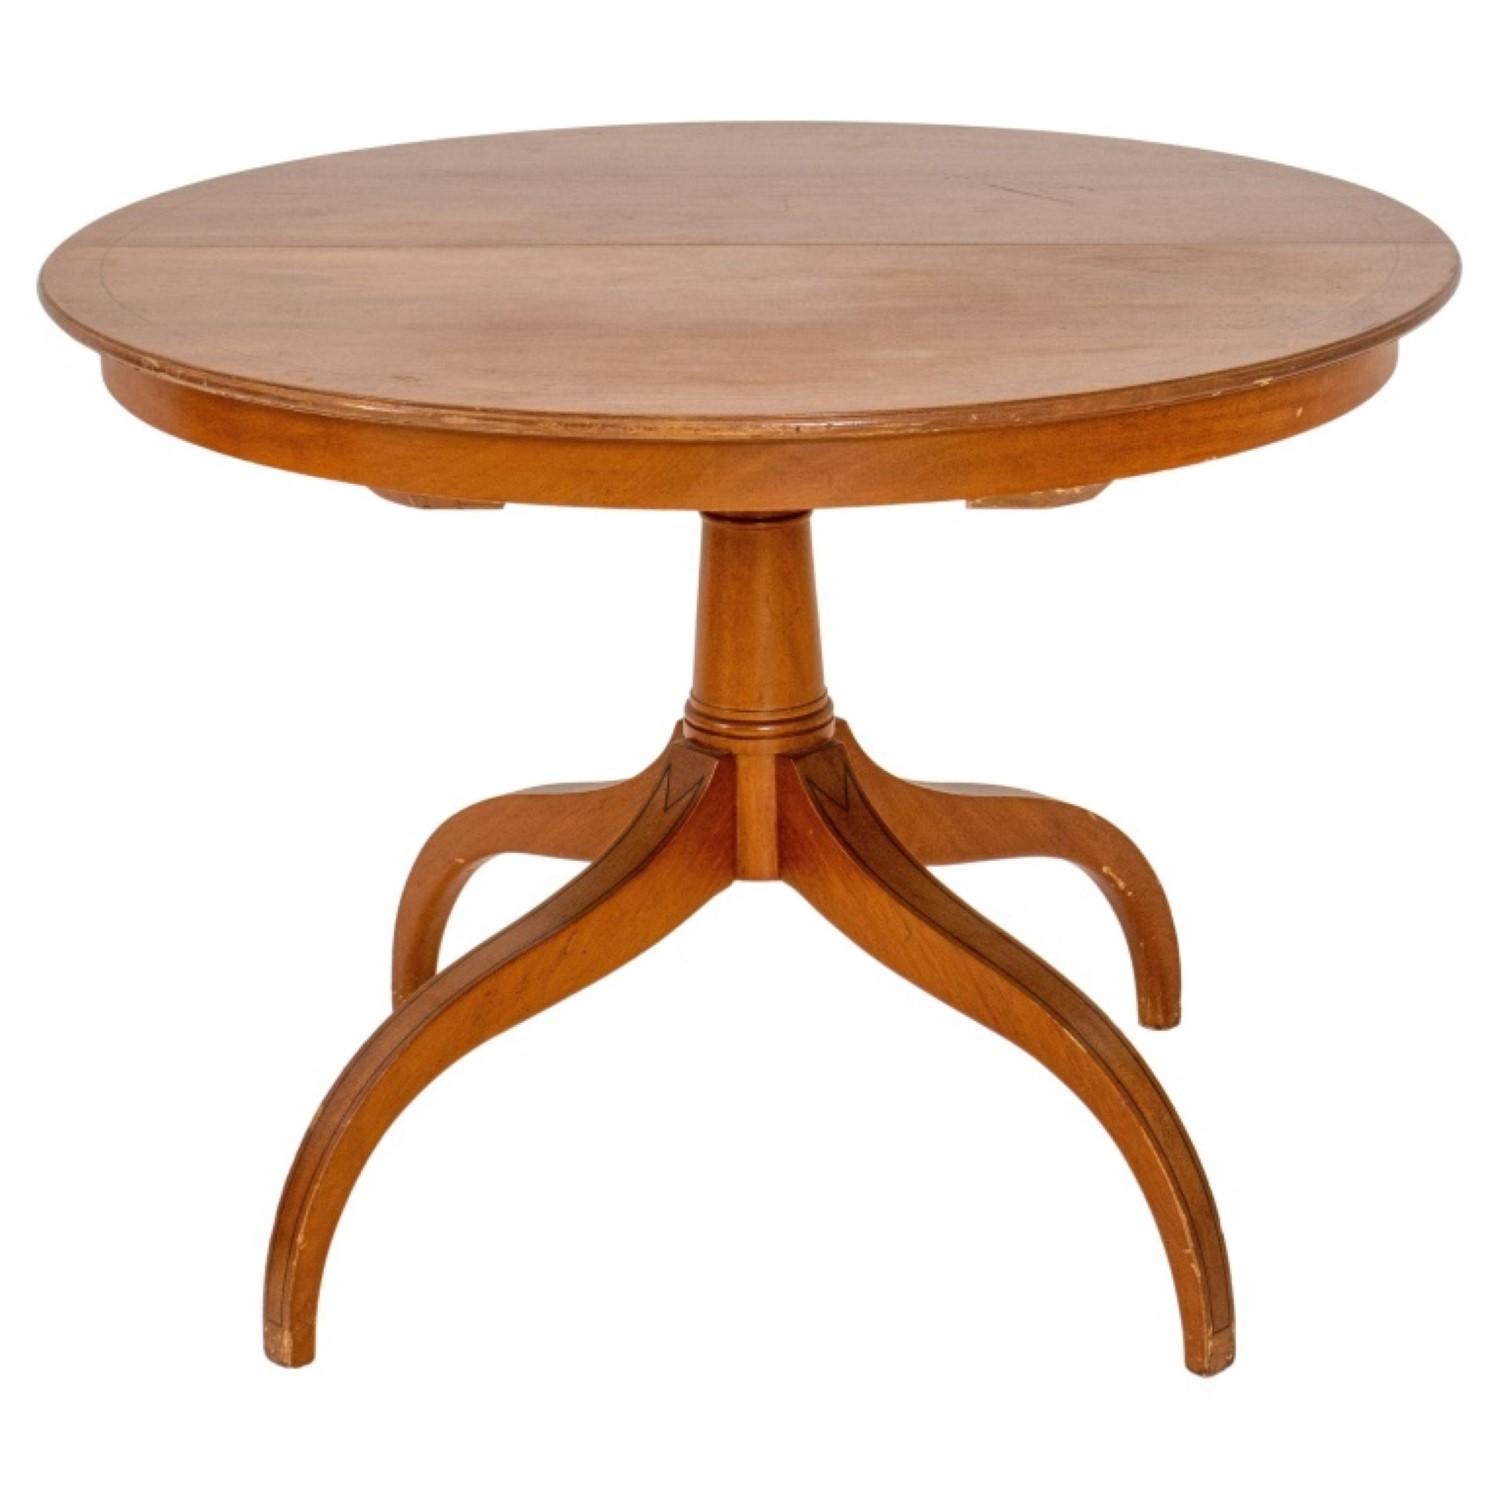 Circular extending mahogany dining table, the round top with ebonized stringing, above a quadrupedal pedestal base similarly stringed and with two rectangular leaves.

29 inches in height, 40 inches in diameter, with two leaves each 40 inches in